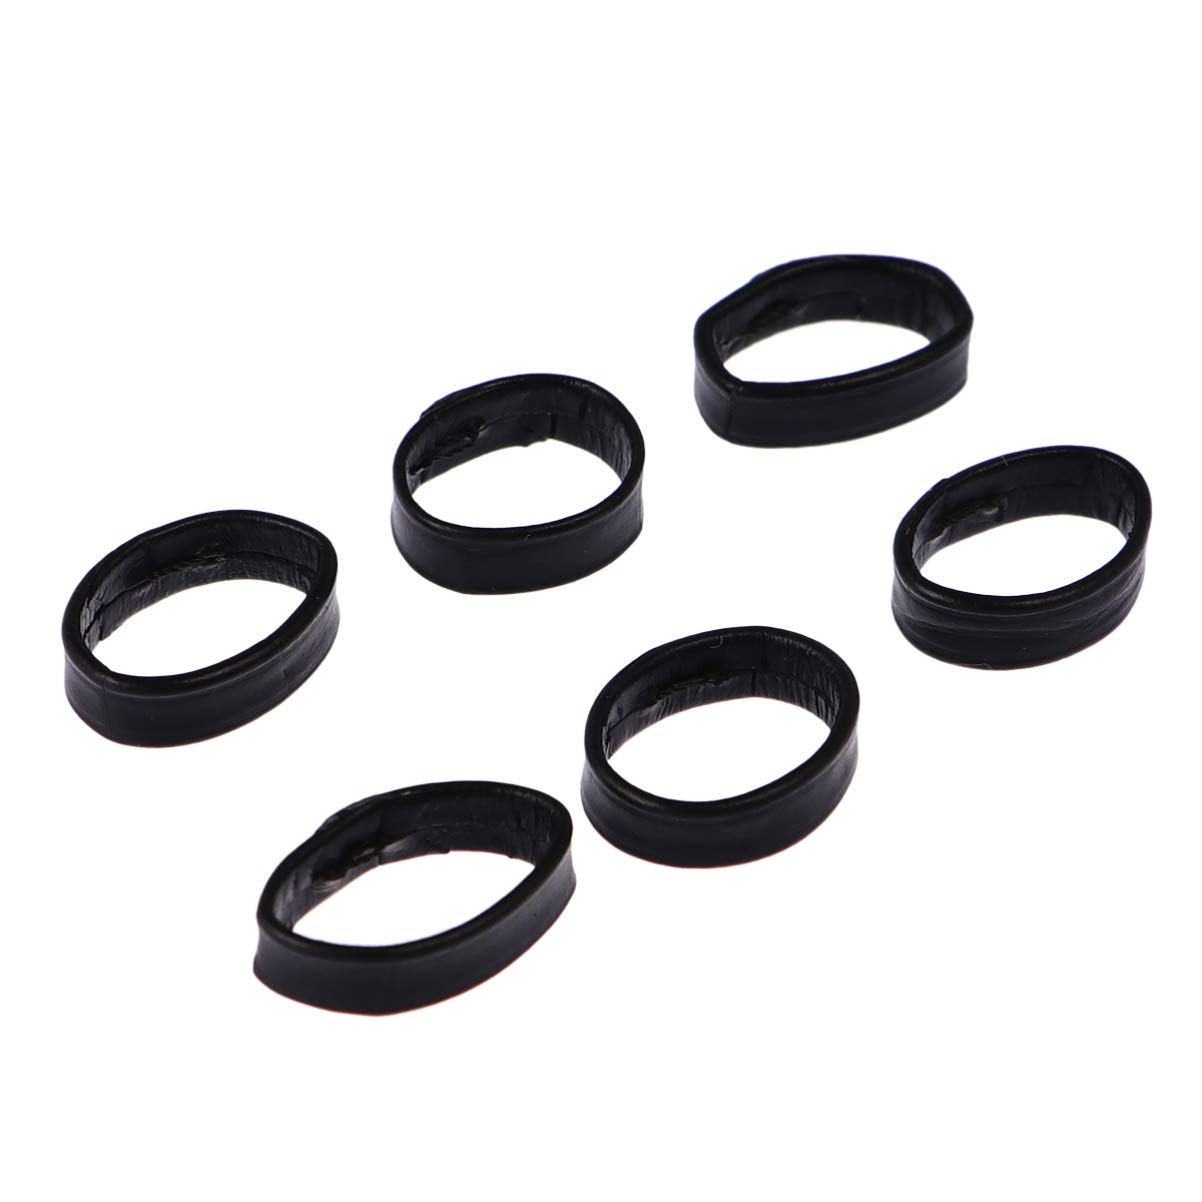 Hemobllo 6pcs Leather Watch Strap Loop Band Holder 18mm Leather Watch Keeper Retainer Ring Replacement Watch Repair Supplies Black